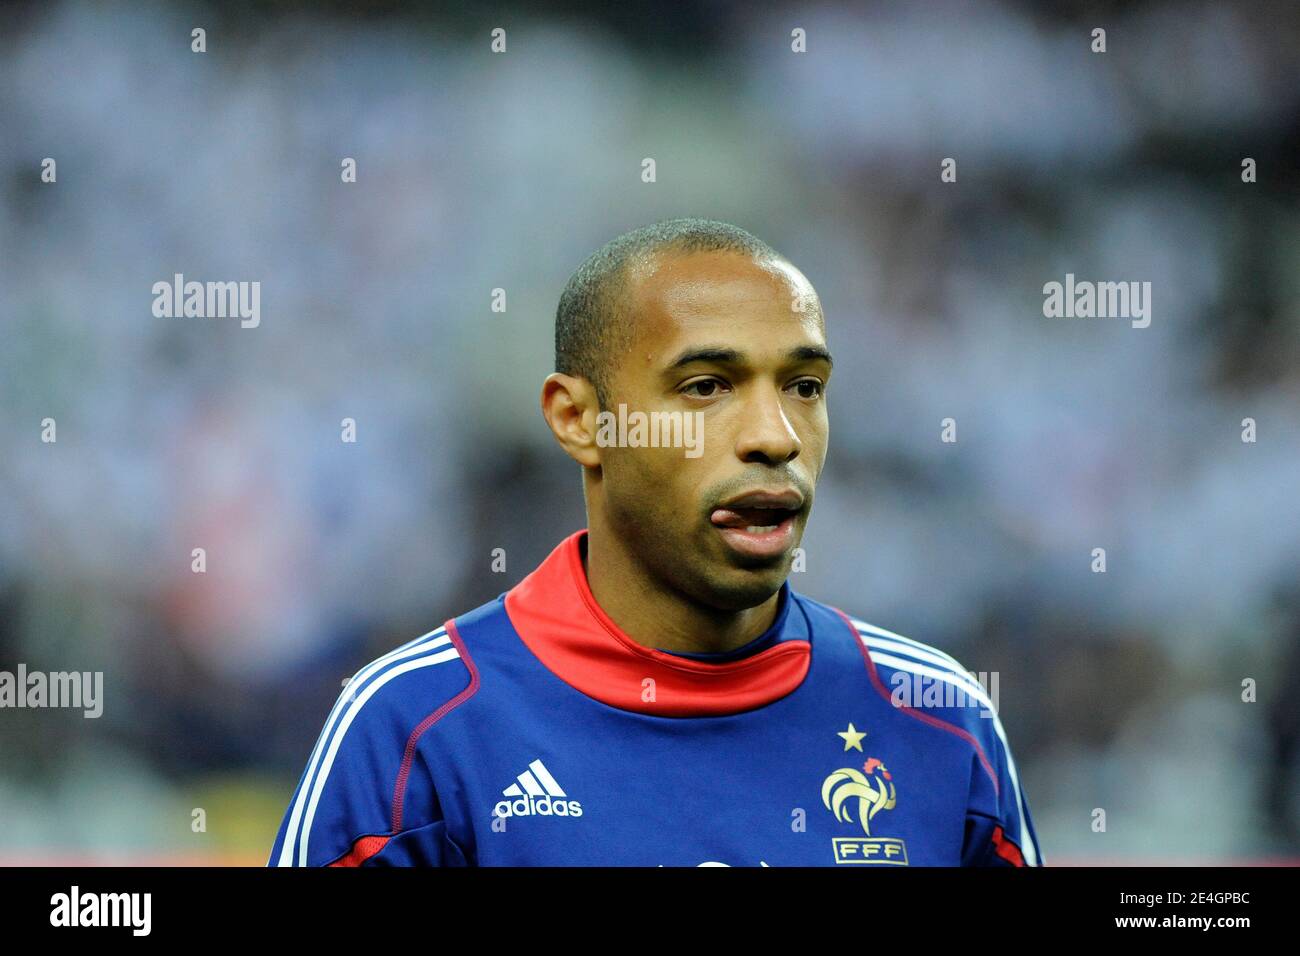 France's Thierry Henry before World Cup Play-off soccer match, France vs Republic of Ireland in Stade de France, Saint-Denis,, France, on November 18, 2009. The Match ended in a 1-1 draw. Photo by Philipe Montigny/ABACAPRESS.COM Stock Photo